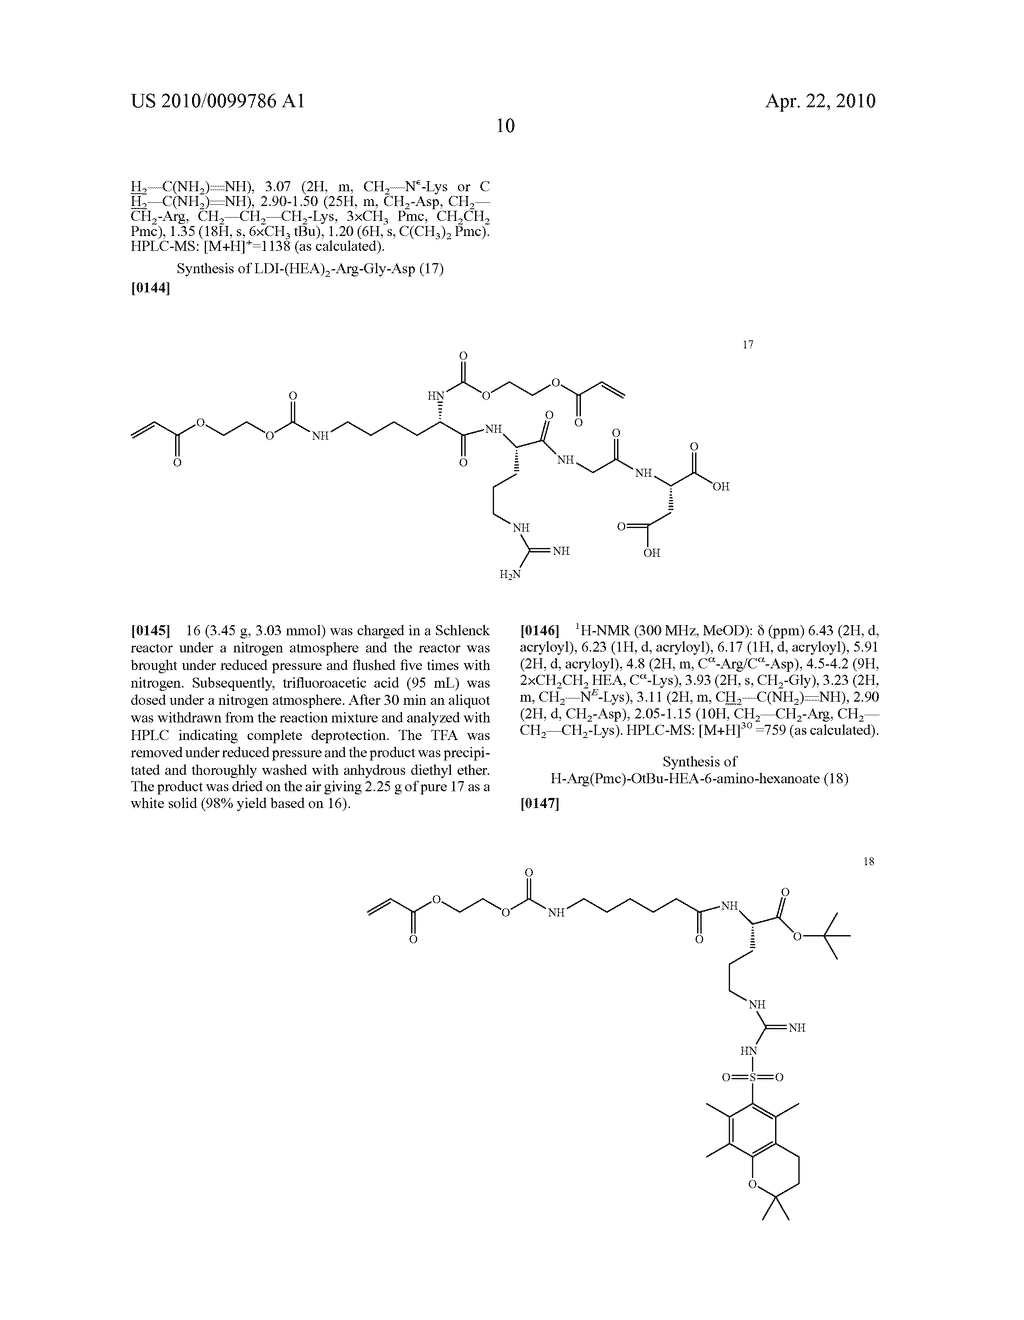 CARBAMATE, THIOCARBAMATE OR CARBAMIDE COMPRISING A BIOMOLECULAR MOIETY - diagram, schematic, and image 26